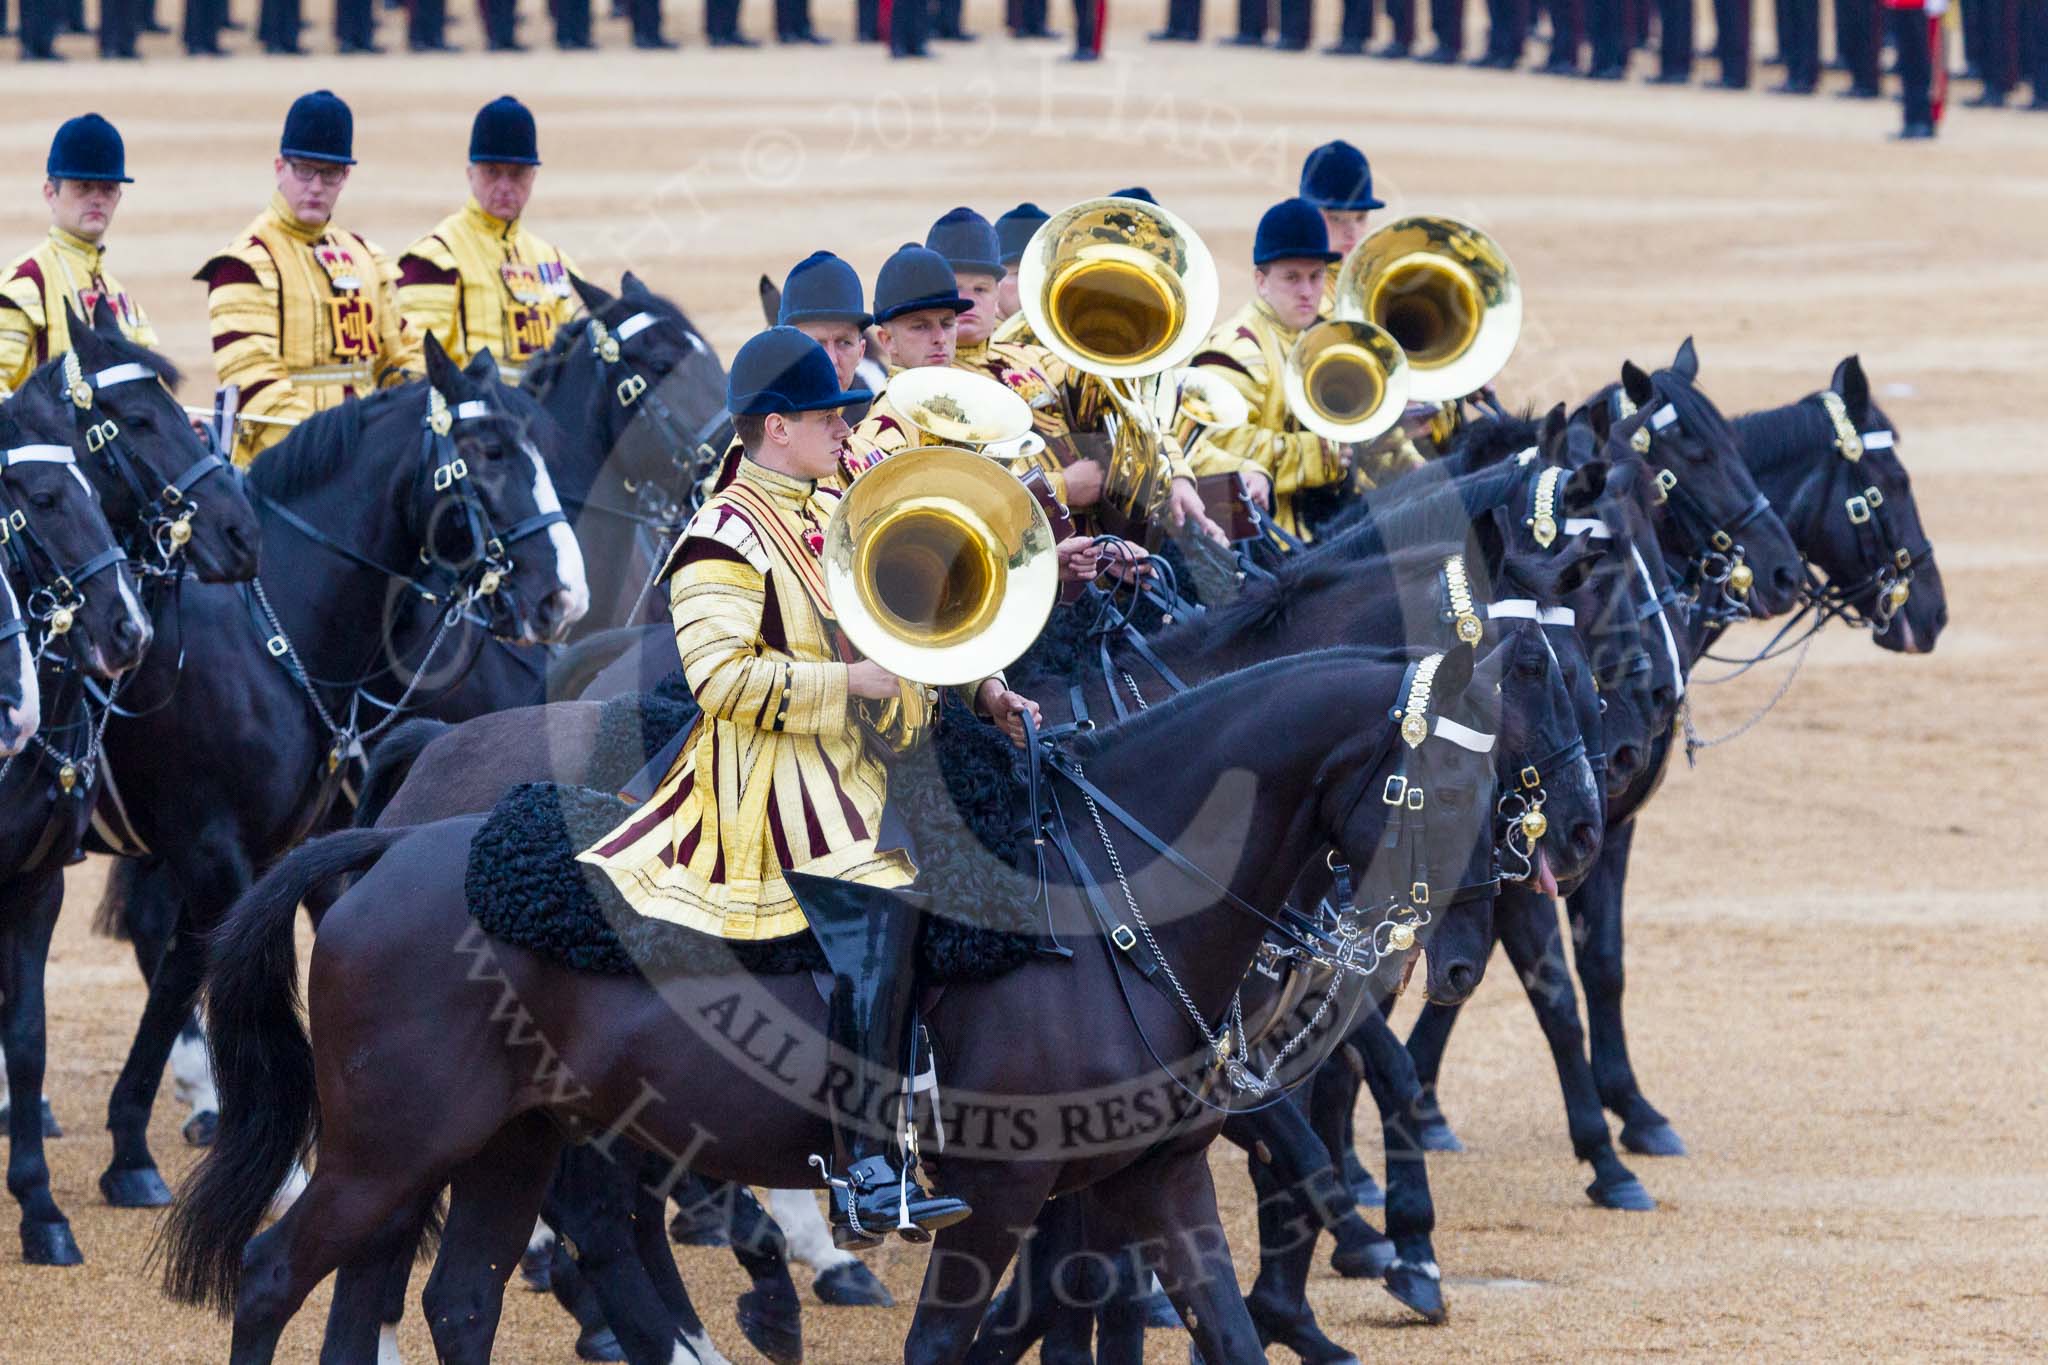 Trooping the Colour 2015. Image #619, 13 June 2015 11:59 Horse Guards Parade, London, UK